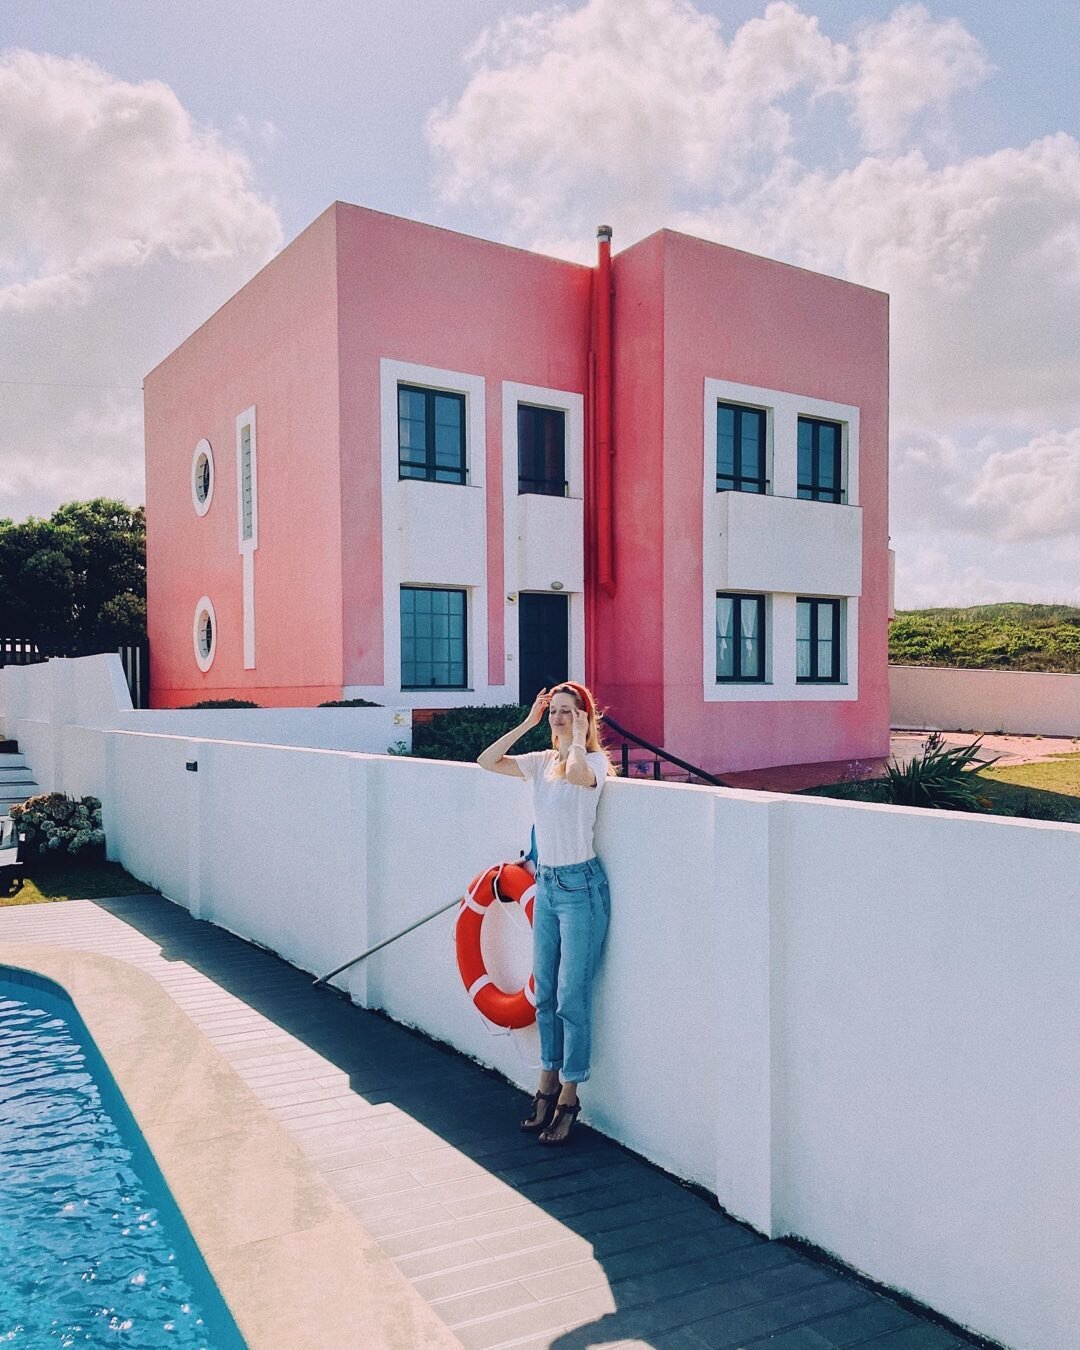 One more summer memory after six hours of freezing in the class room. 

#portugal #ericeira #surfcamp #summer #memories #pinkismyfavoritecolor #pinkdreams #architecture